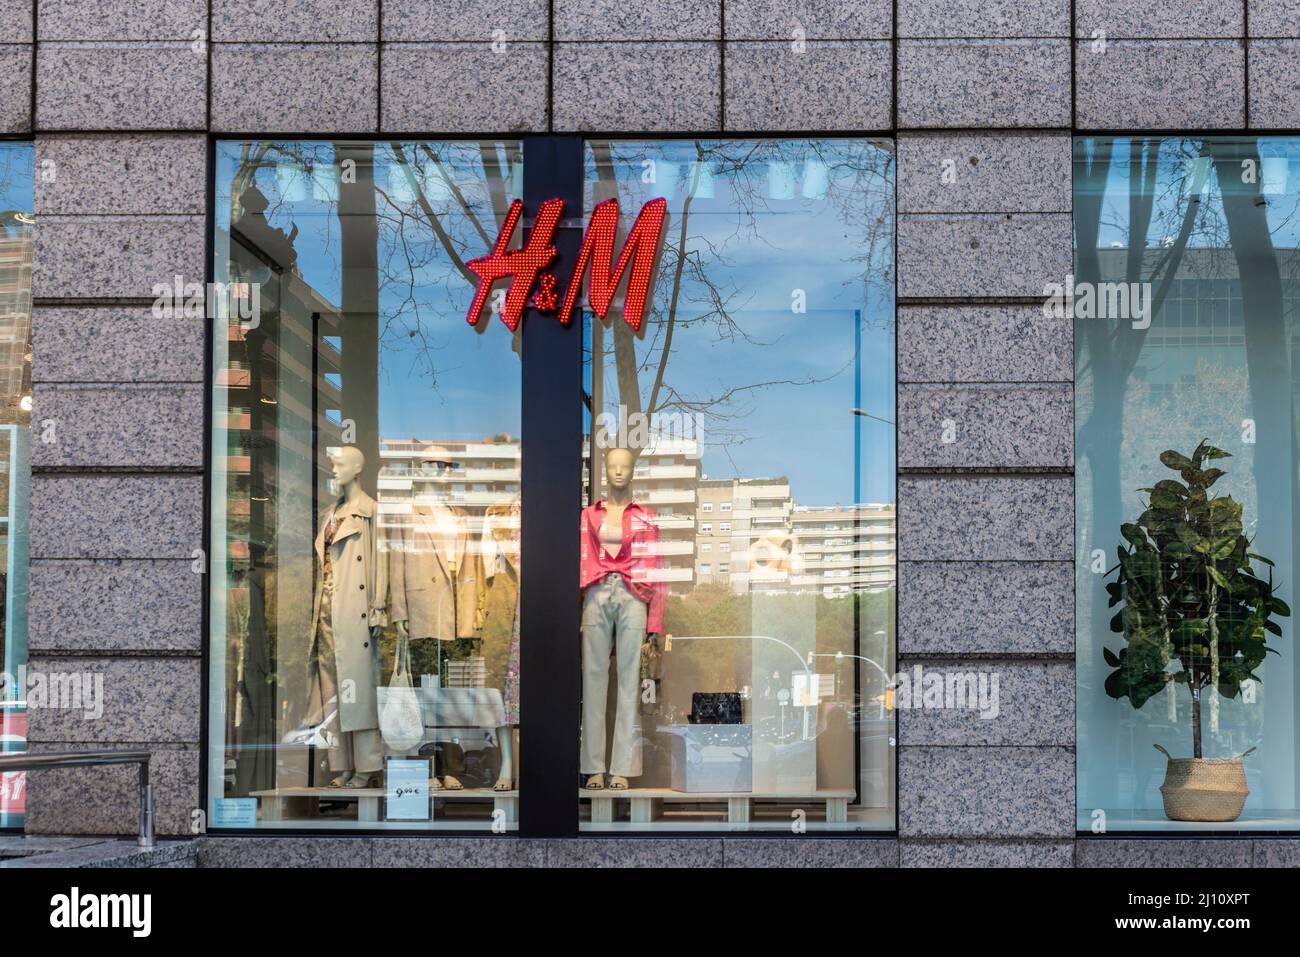 Barcelona, Spain - February 24, 2022: Facade of a HM or H&M clothing store in Diagonal avenue, a shopping street of Barcelona, Catalonia, Spain Stock Photo